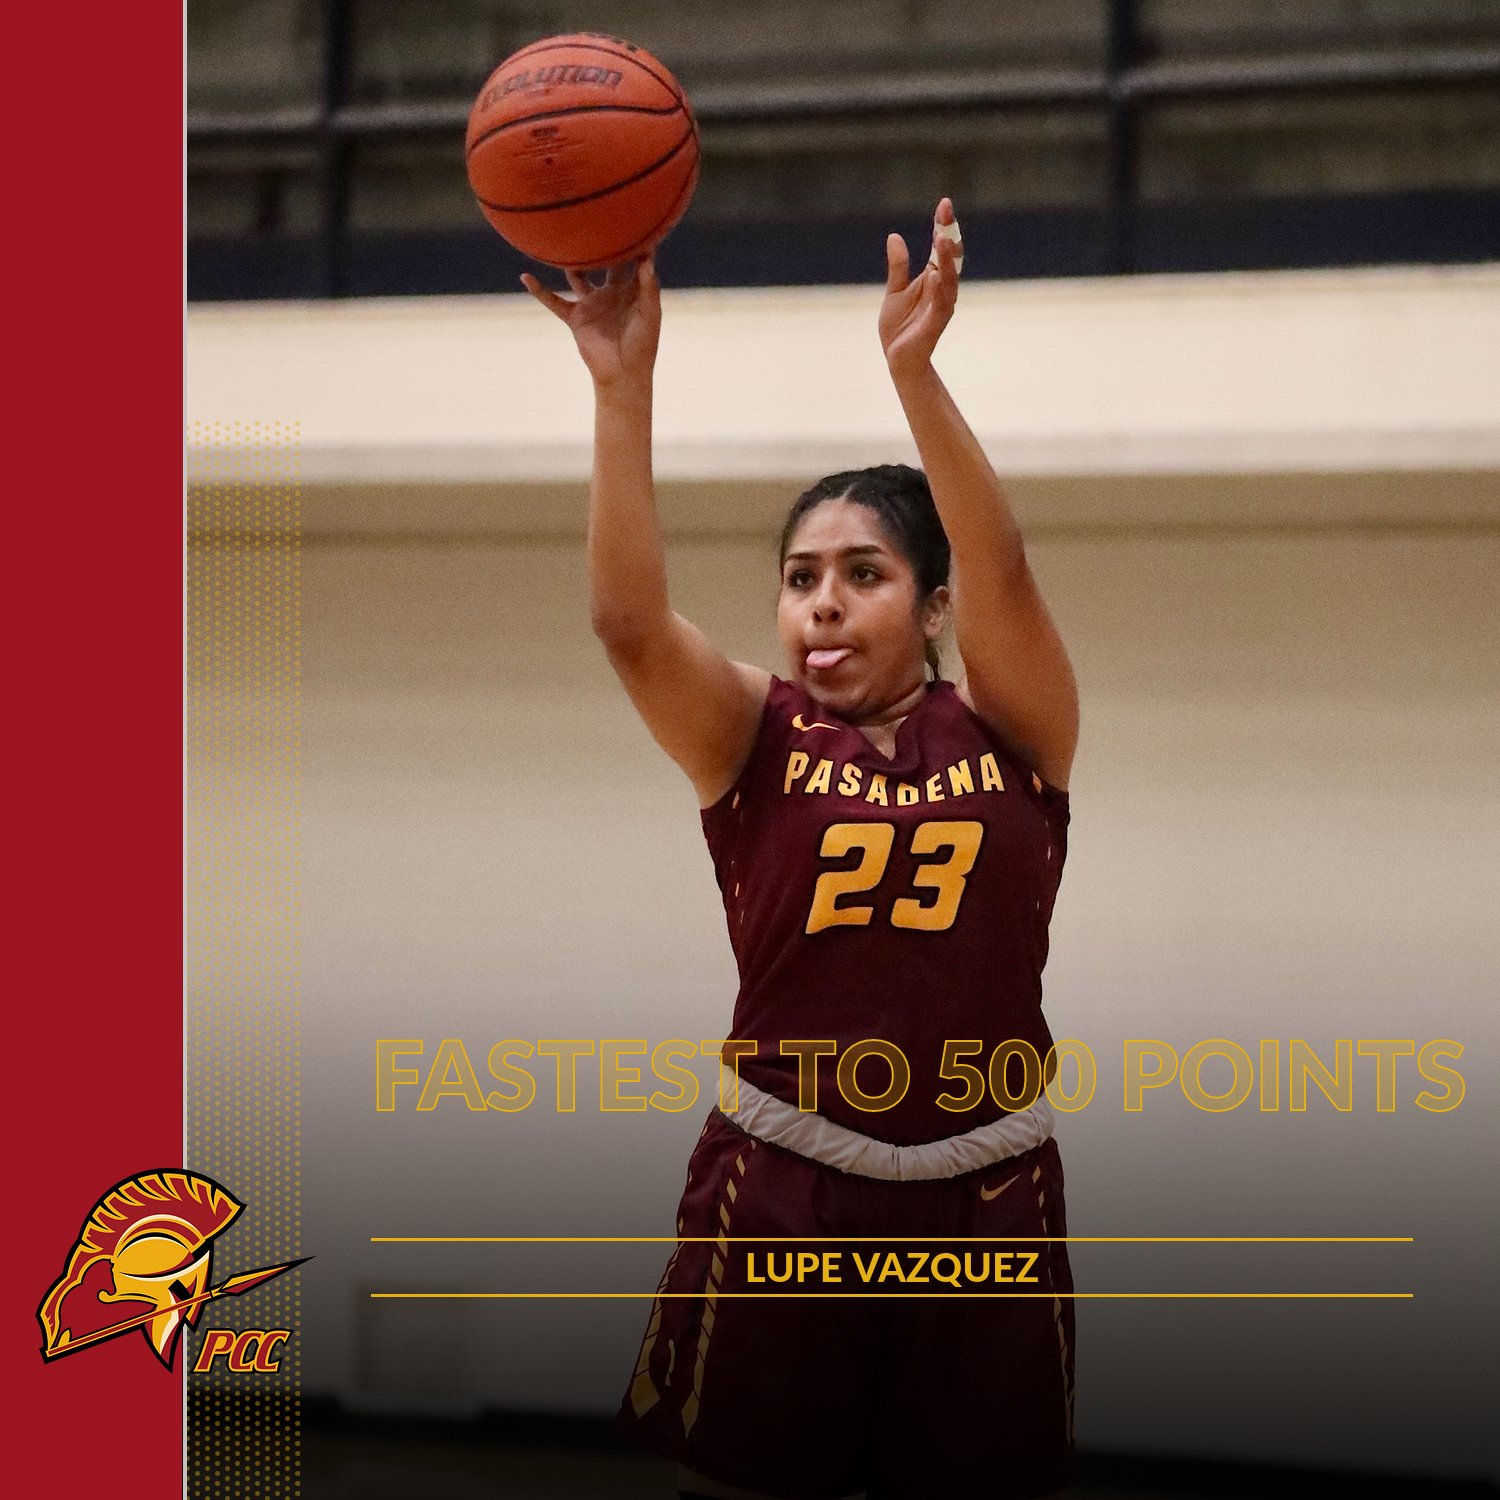 Lupe Vazquez joined the 500-point Club for PCC women's basketball on Wednesday night.